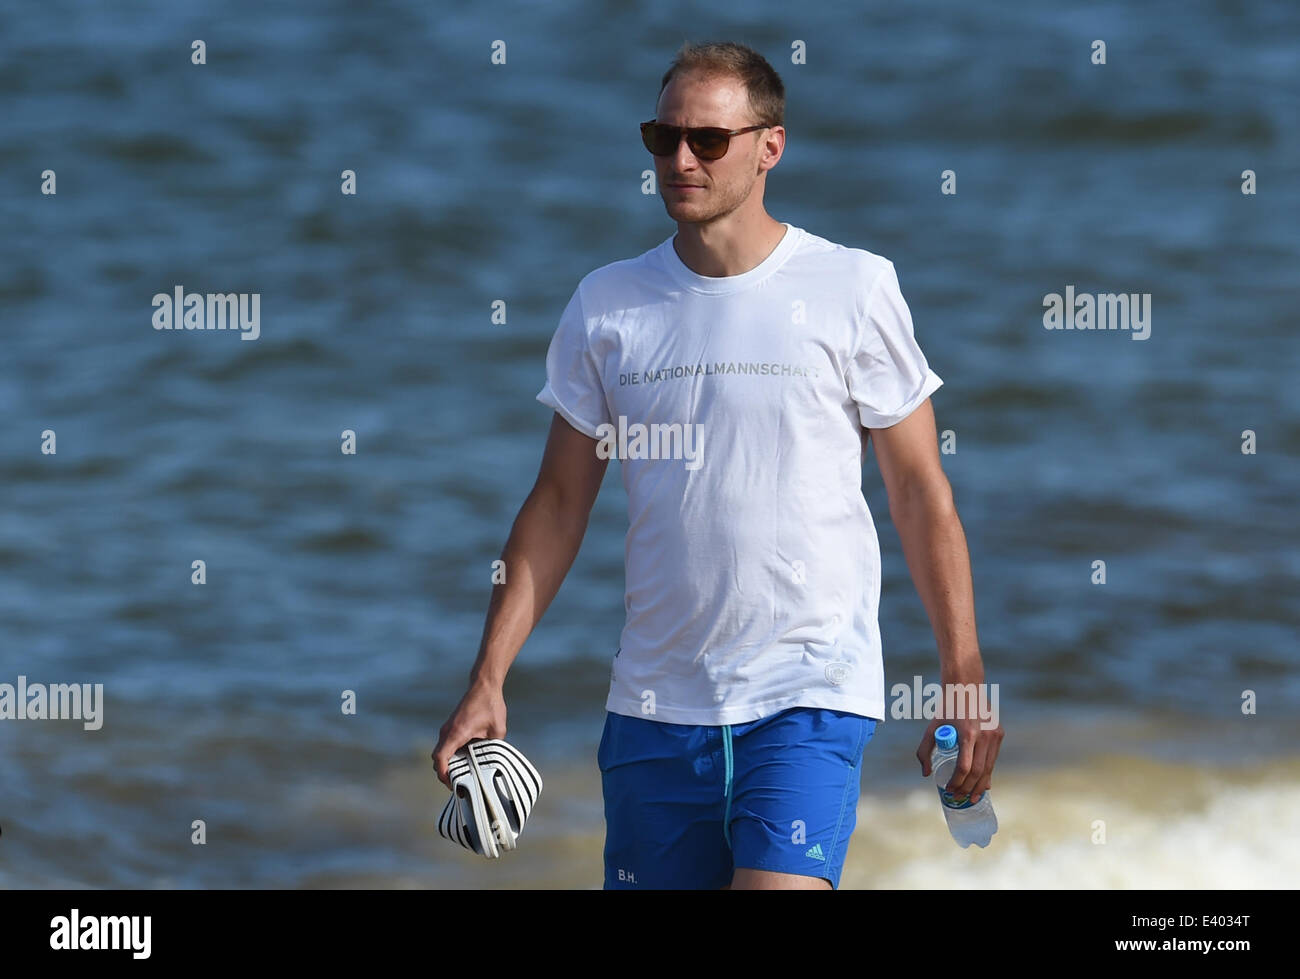 Santo Andre, Brazil. 01st July, 2014. German soccer player Benedikt Hoewedes walks along the beach near the team hotel in Santo Andre, Brazil, 01 July 2014. The FIFA World Cup 2014 takes place in Brazil from 12 June to 13 July 2014. Photo: Andreas Gebert/dpa/Alamy Live News Stock Photo